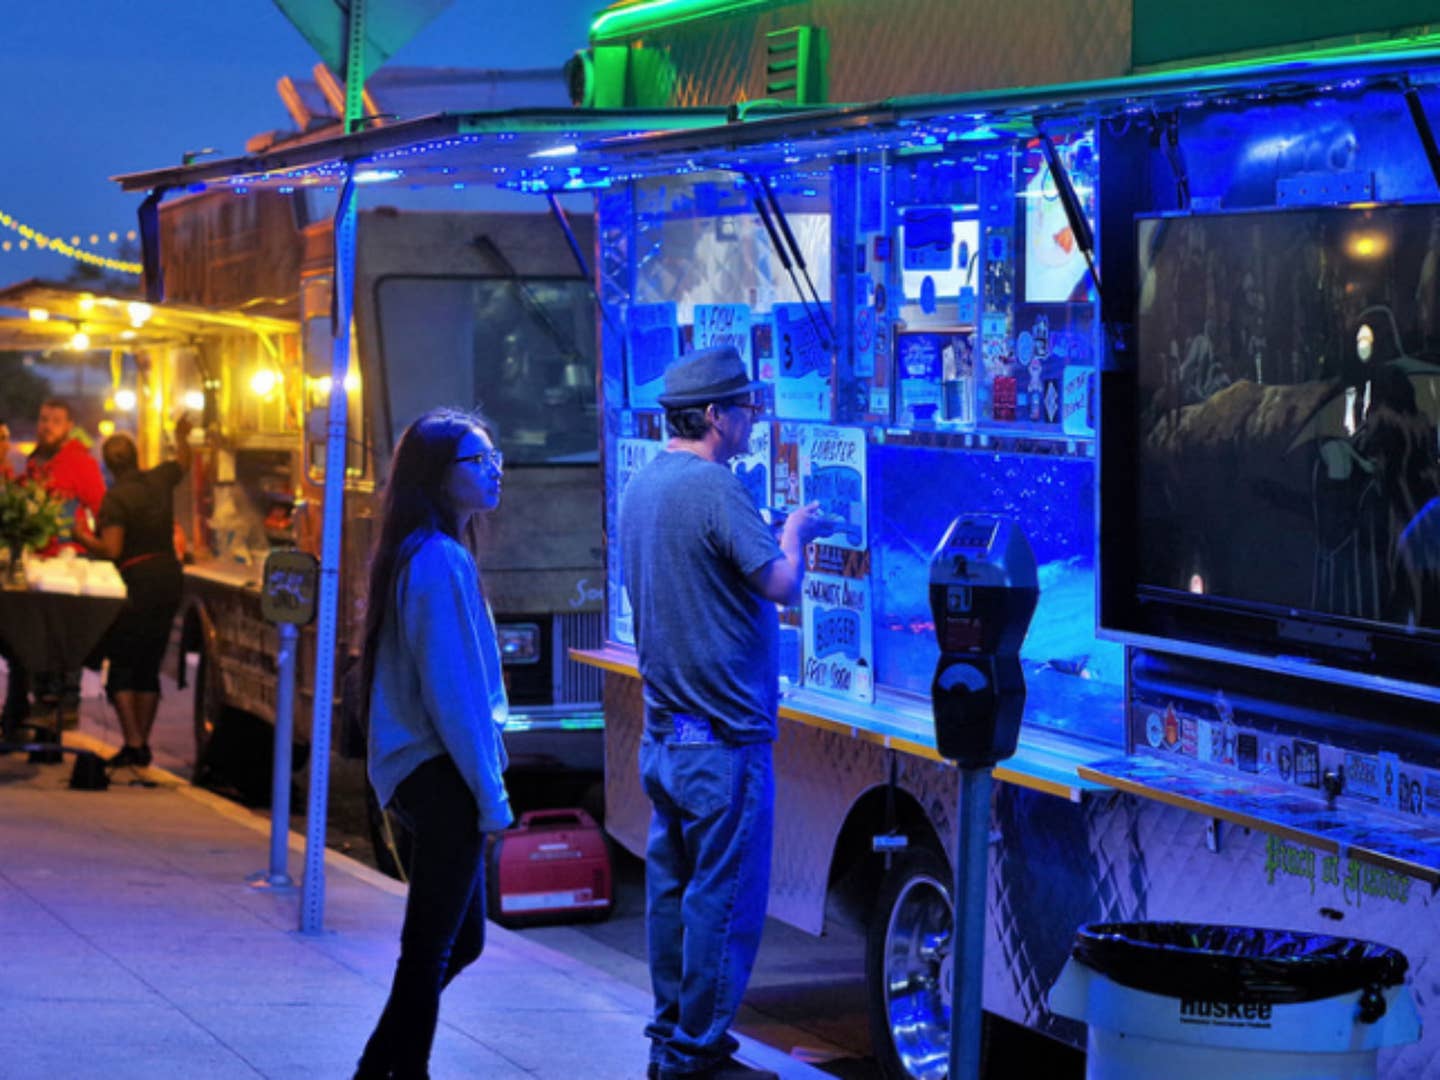 L.A. Legalizes Street-Food Vendors in Wake of Trump’s Immigration Policies